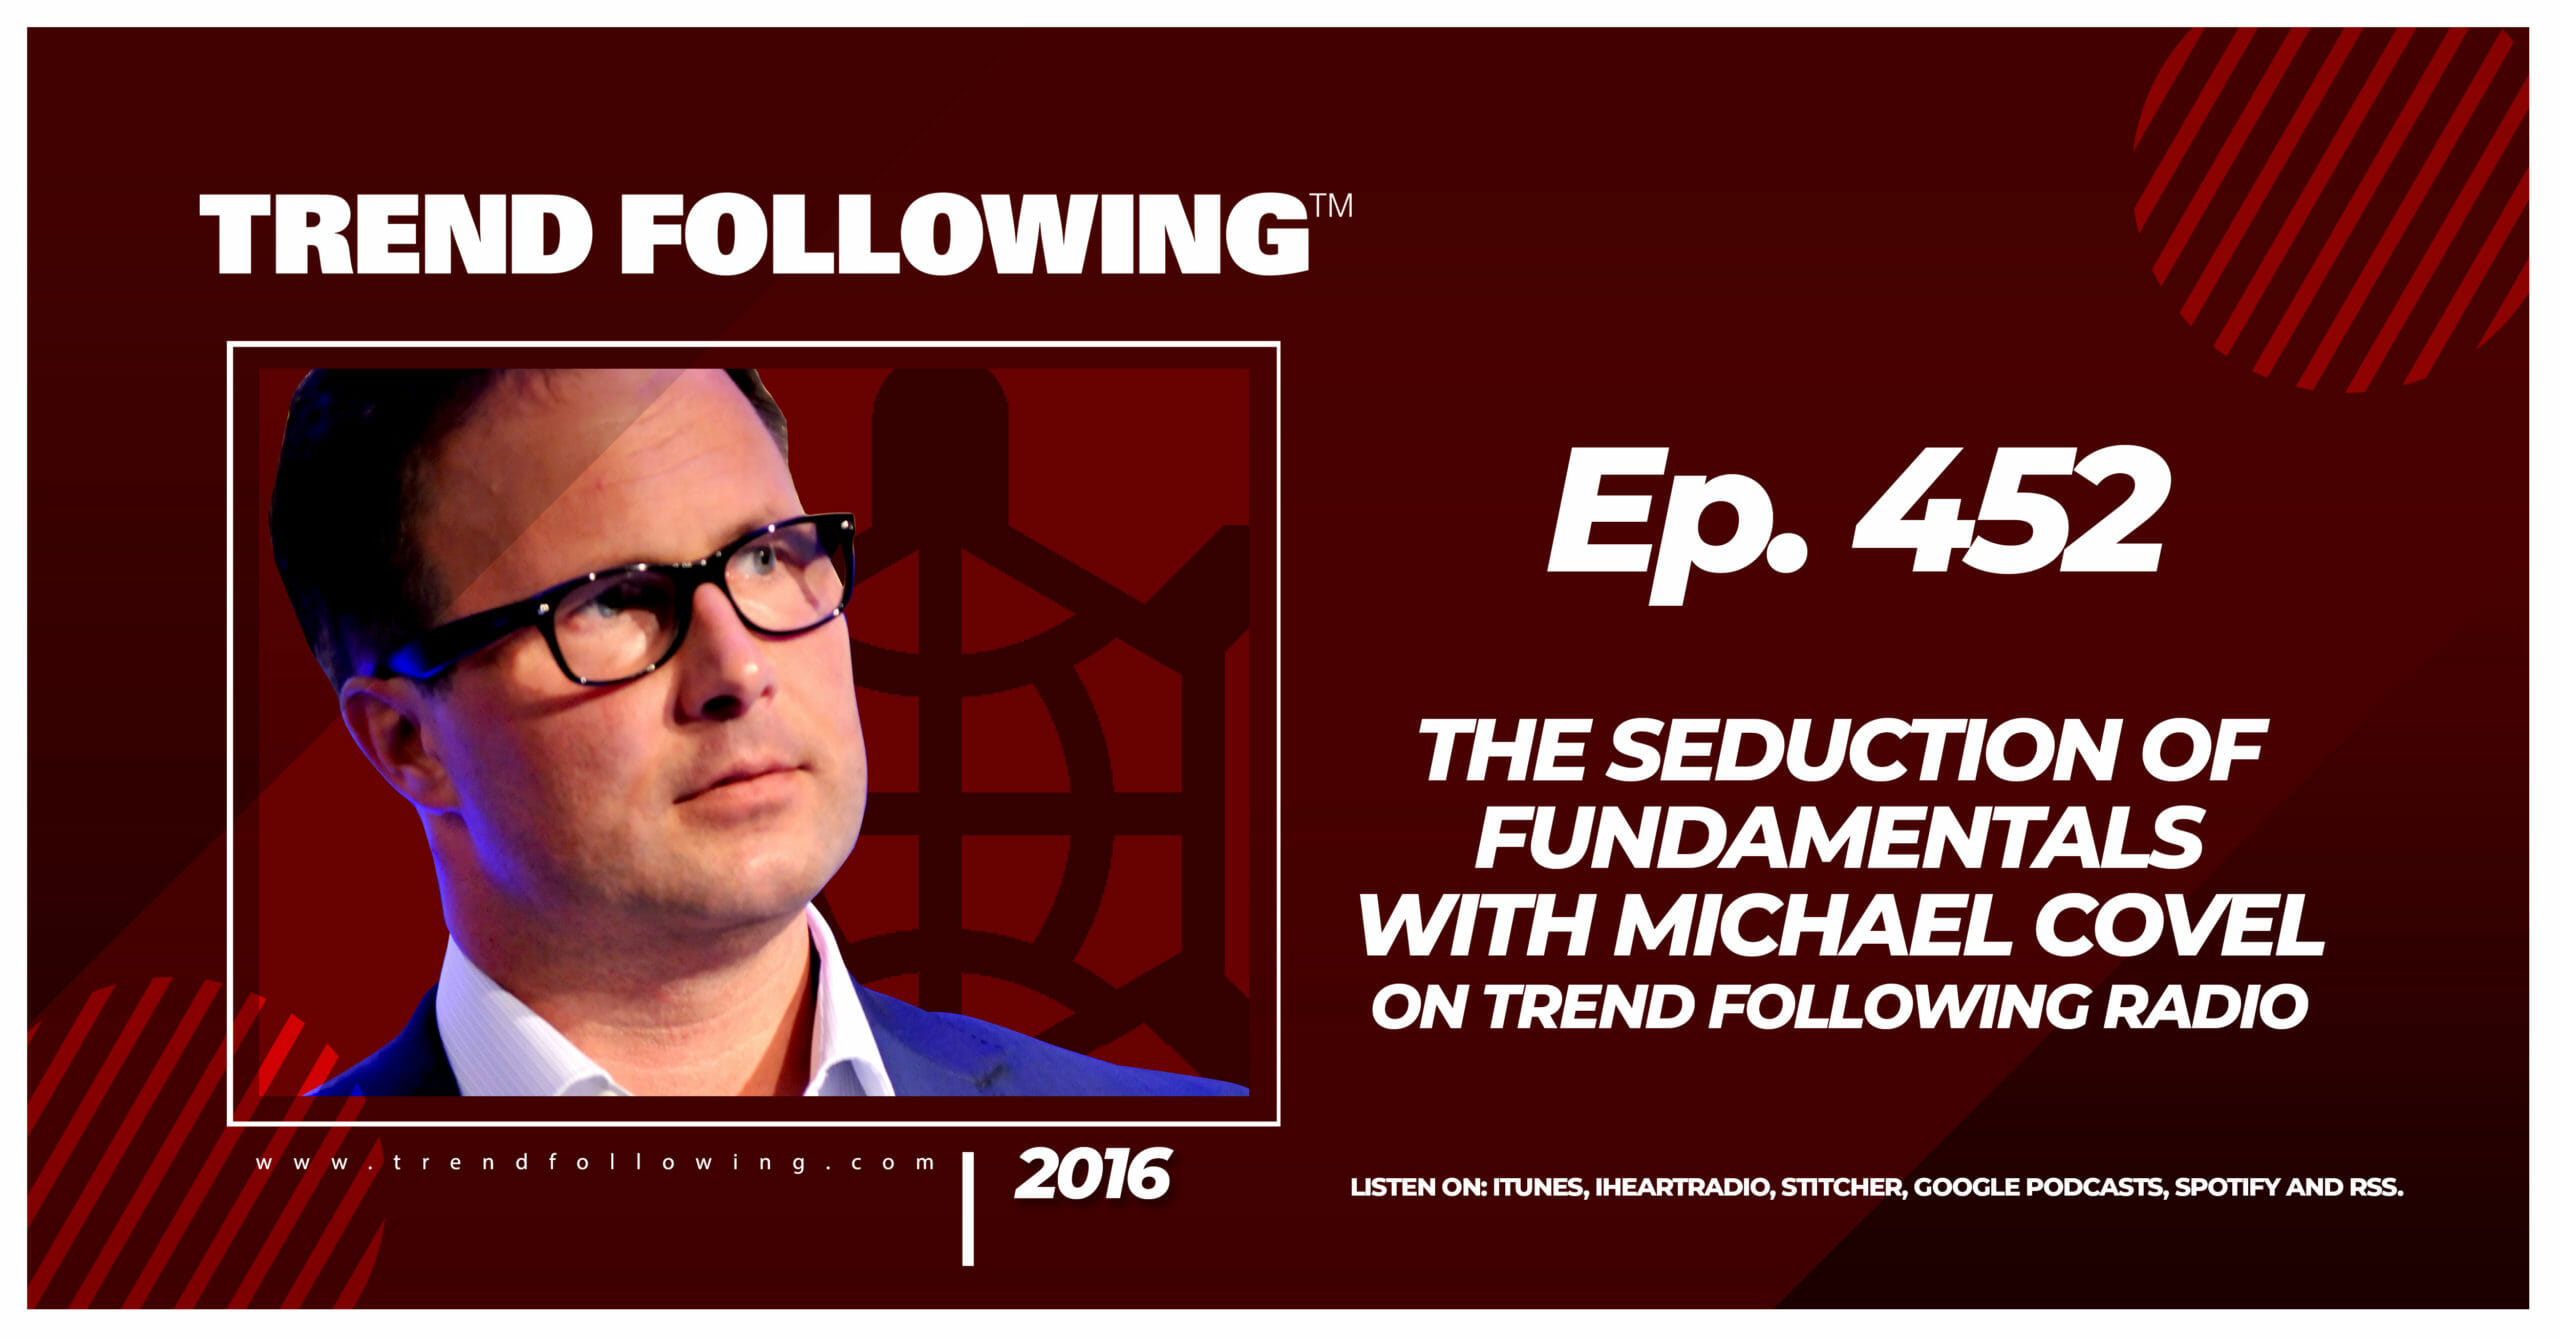 The Seduction of Fundamentals with Michael Covel on Trend Following Radio